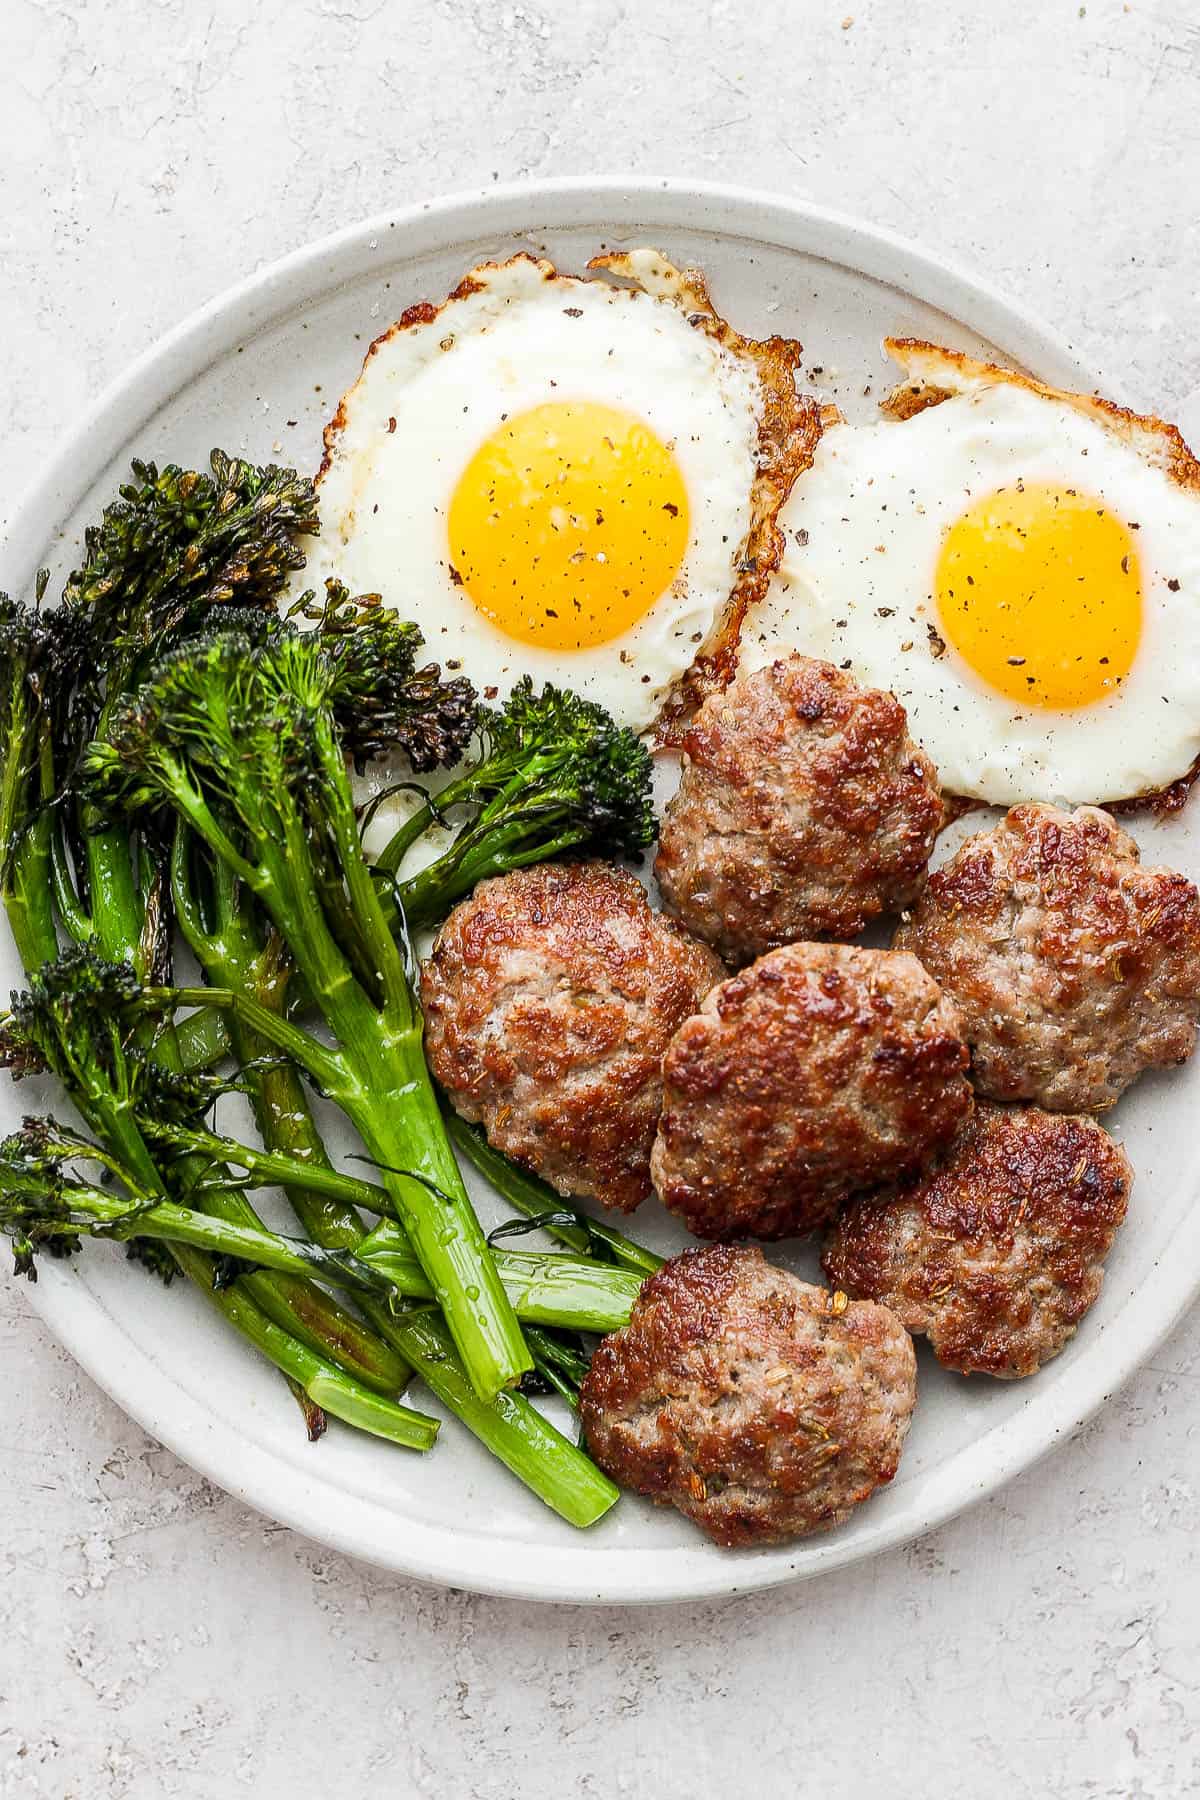 Sausage on a plate with eggs and broccolini.